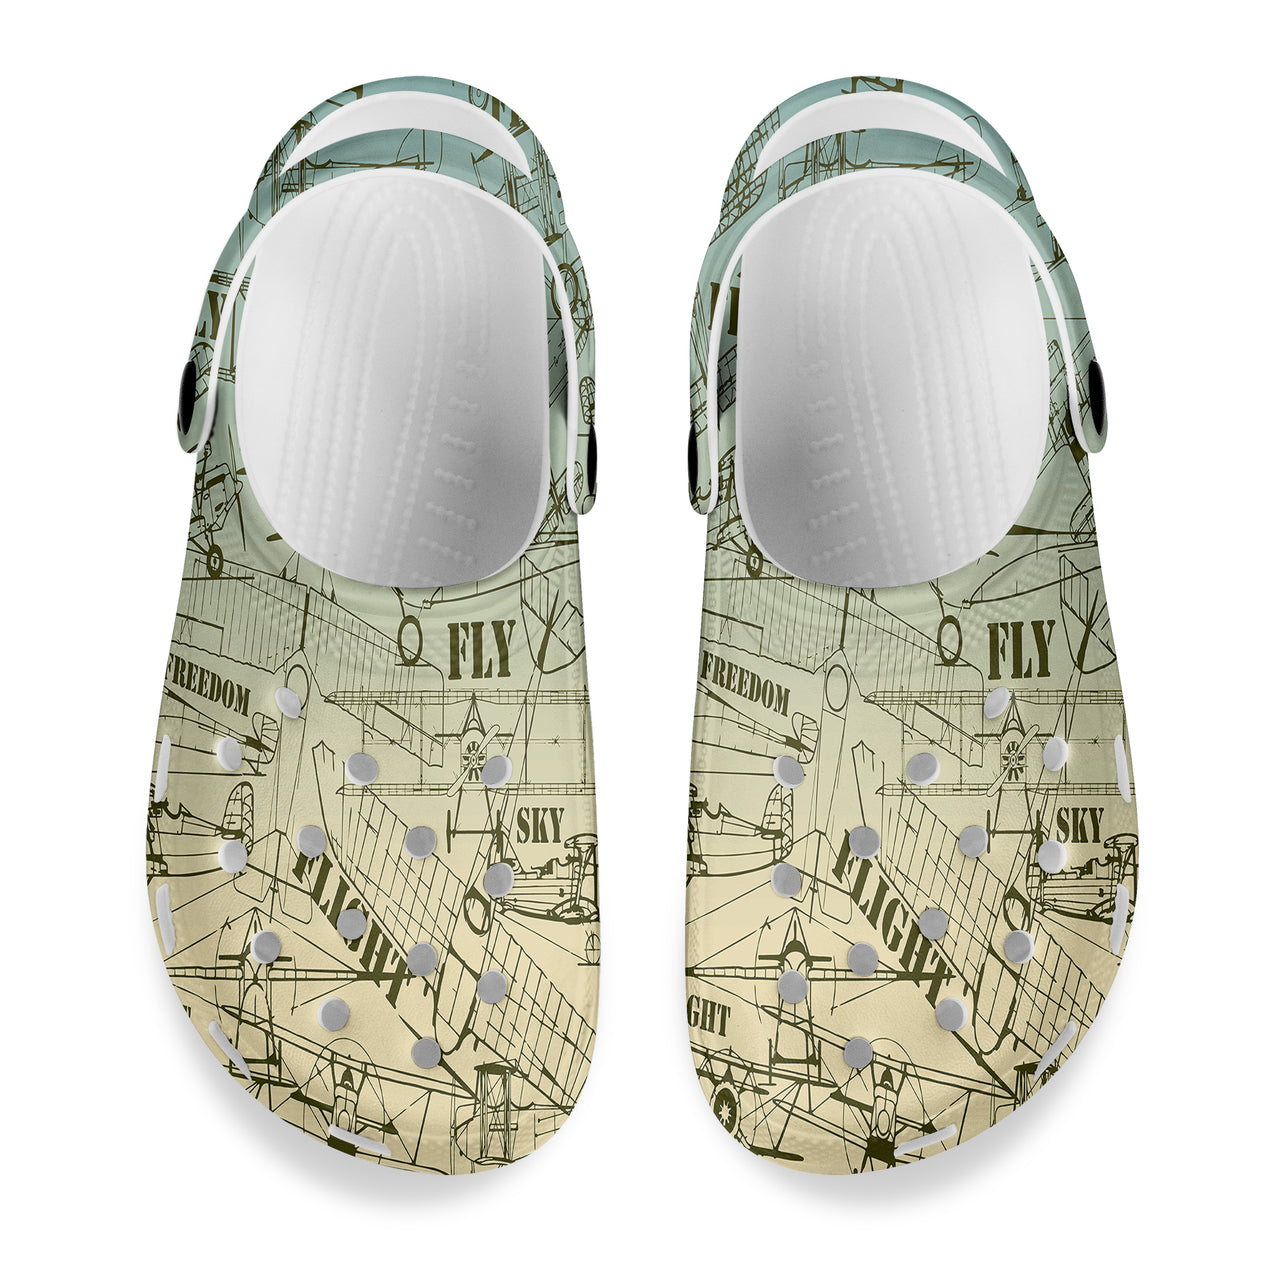 Retro Airplanes & Text Designed Hole Shoes & Slippers (MEN)